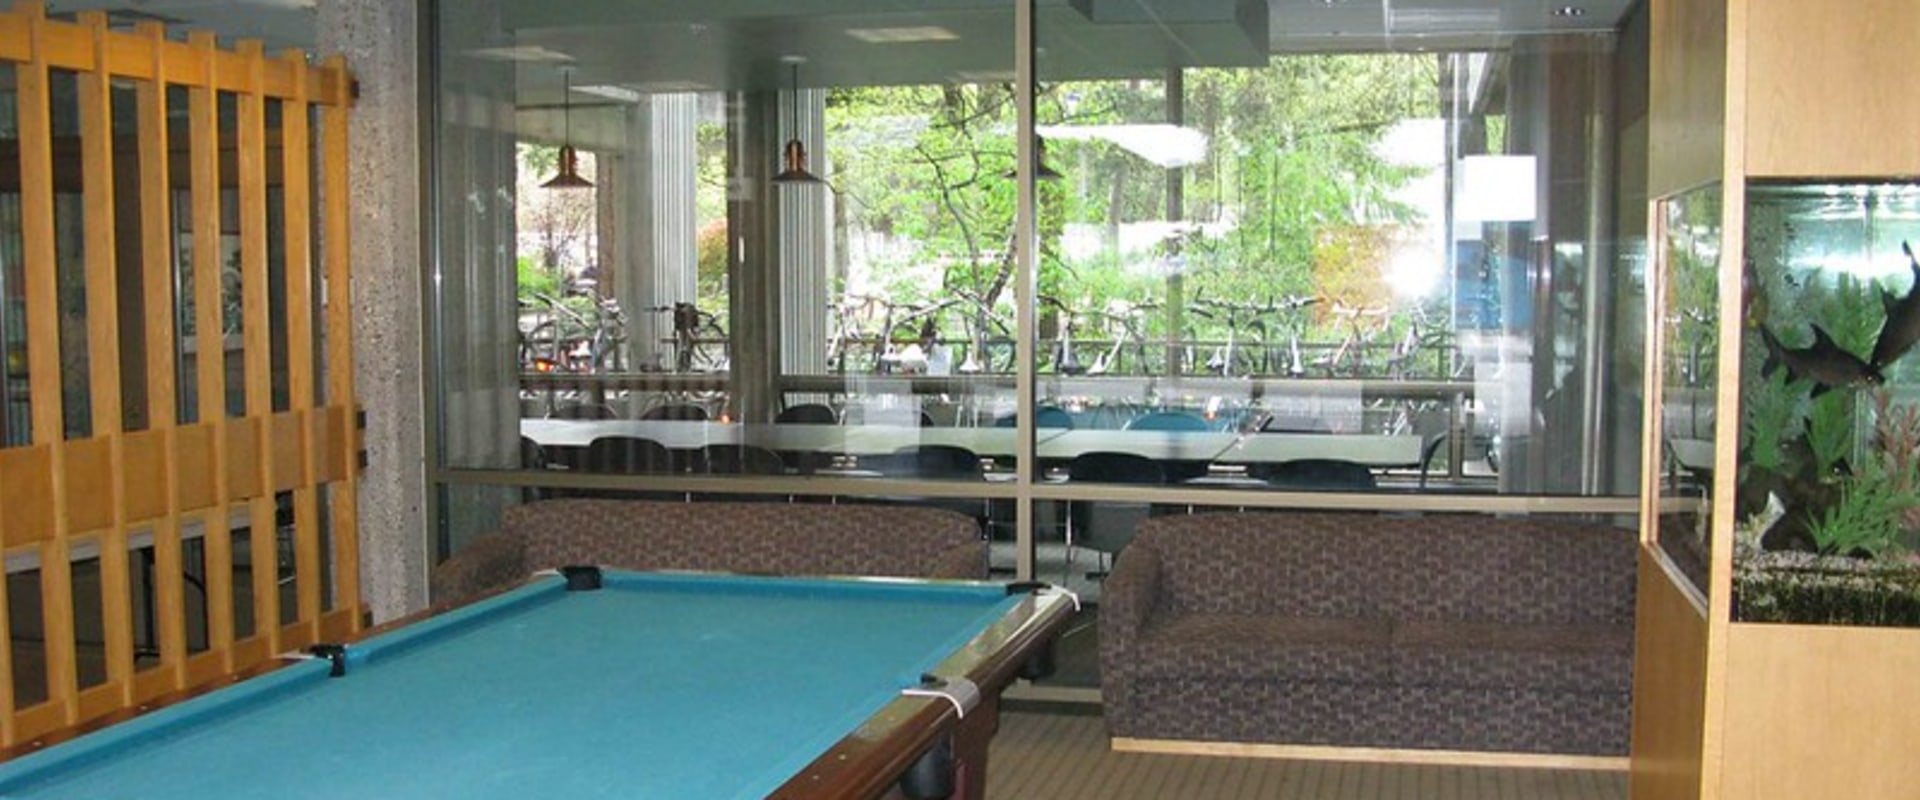 Deck Construction In New England: Why Pool Table Repair And Refelting Is The Perfect Finishing Touch